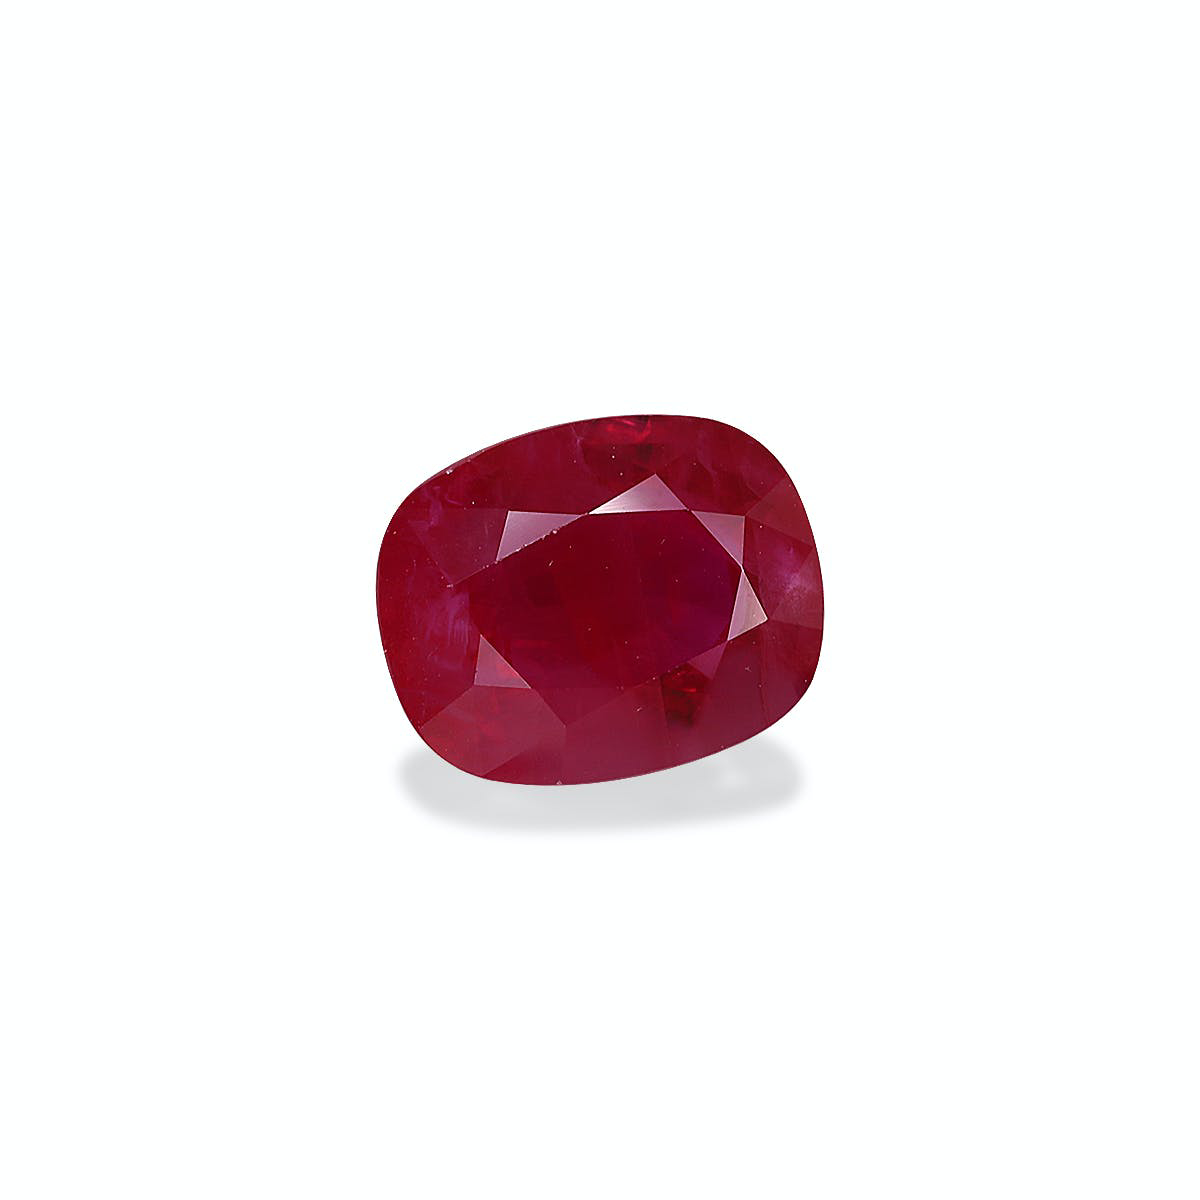 Picture of Red Burma Ruby 3.74ct (WC1103-02)